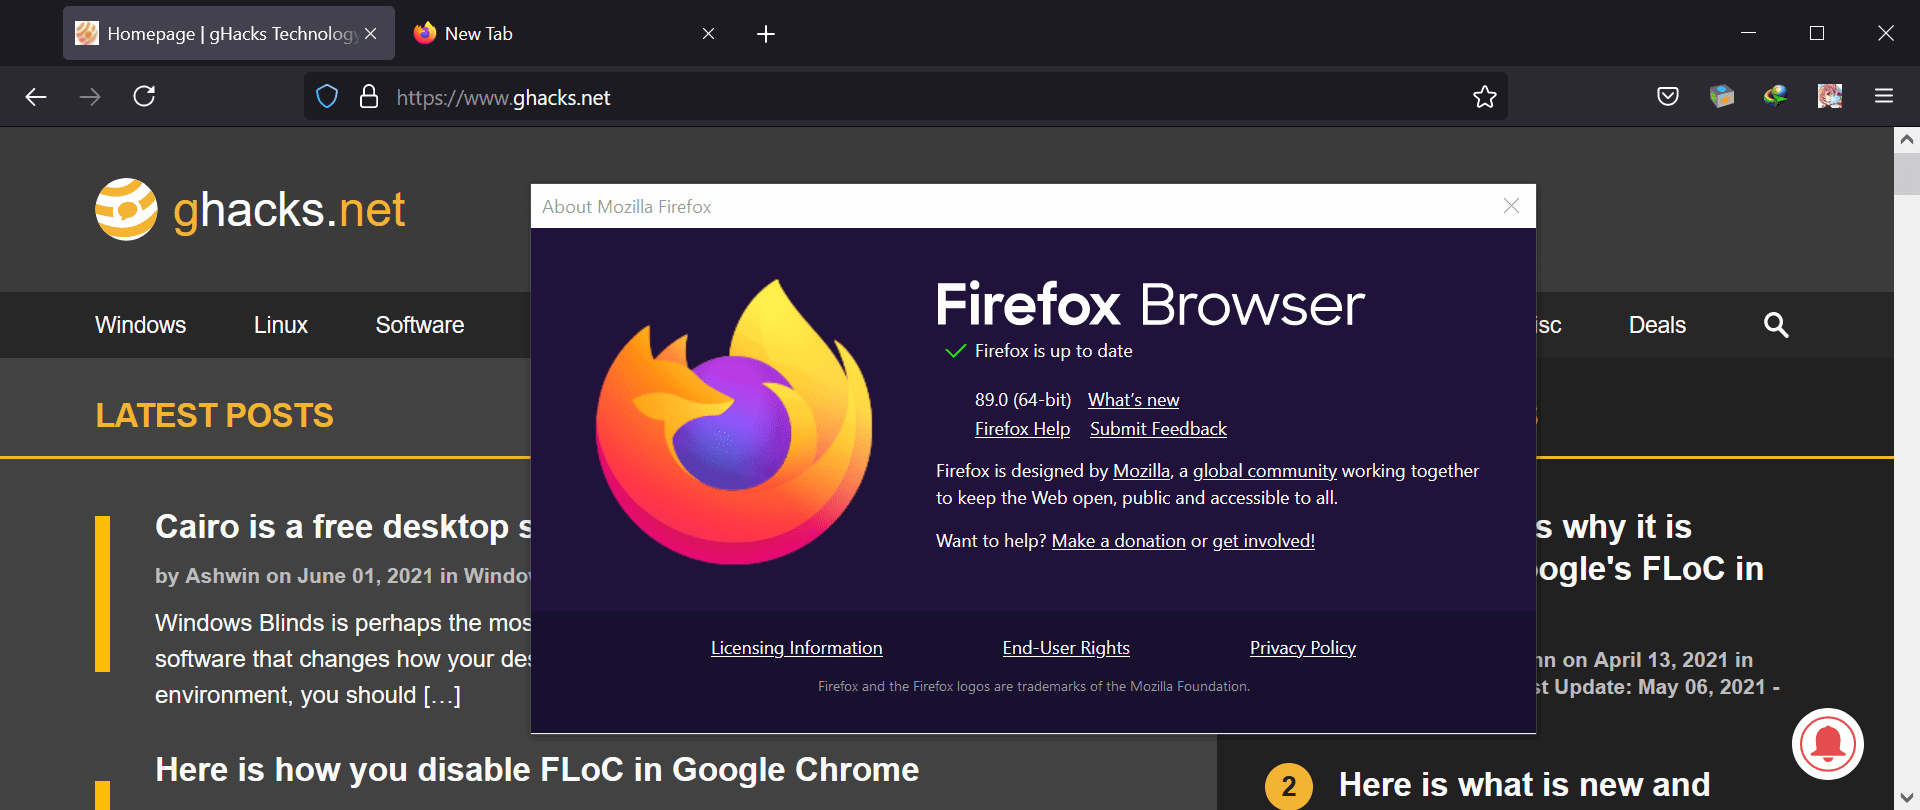 is firefox fixed yet for mac?